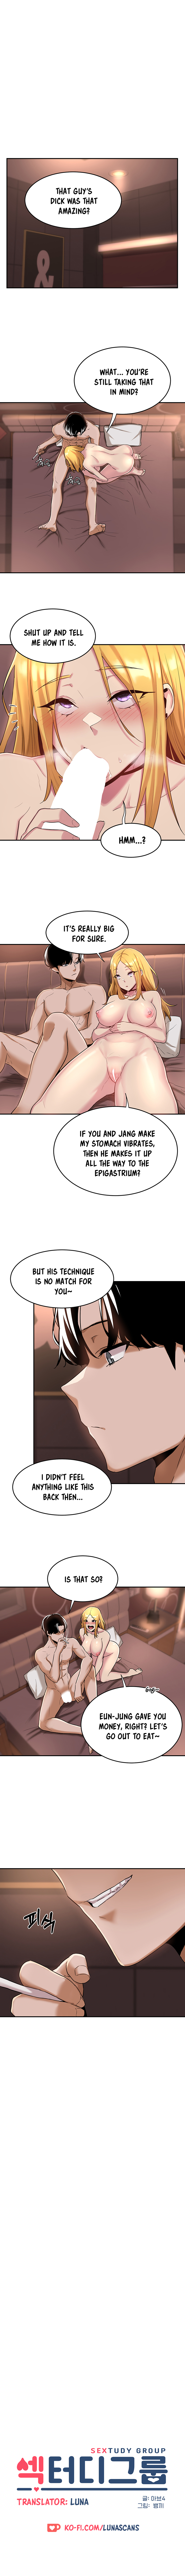 Panel Image 1 for chapter 11 of manhwa Sex Study Group on read.oppai.stream